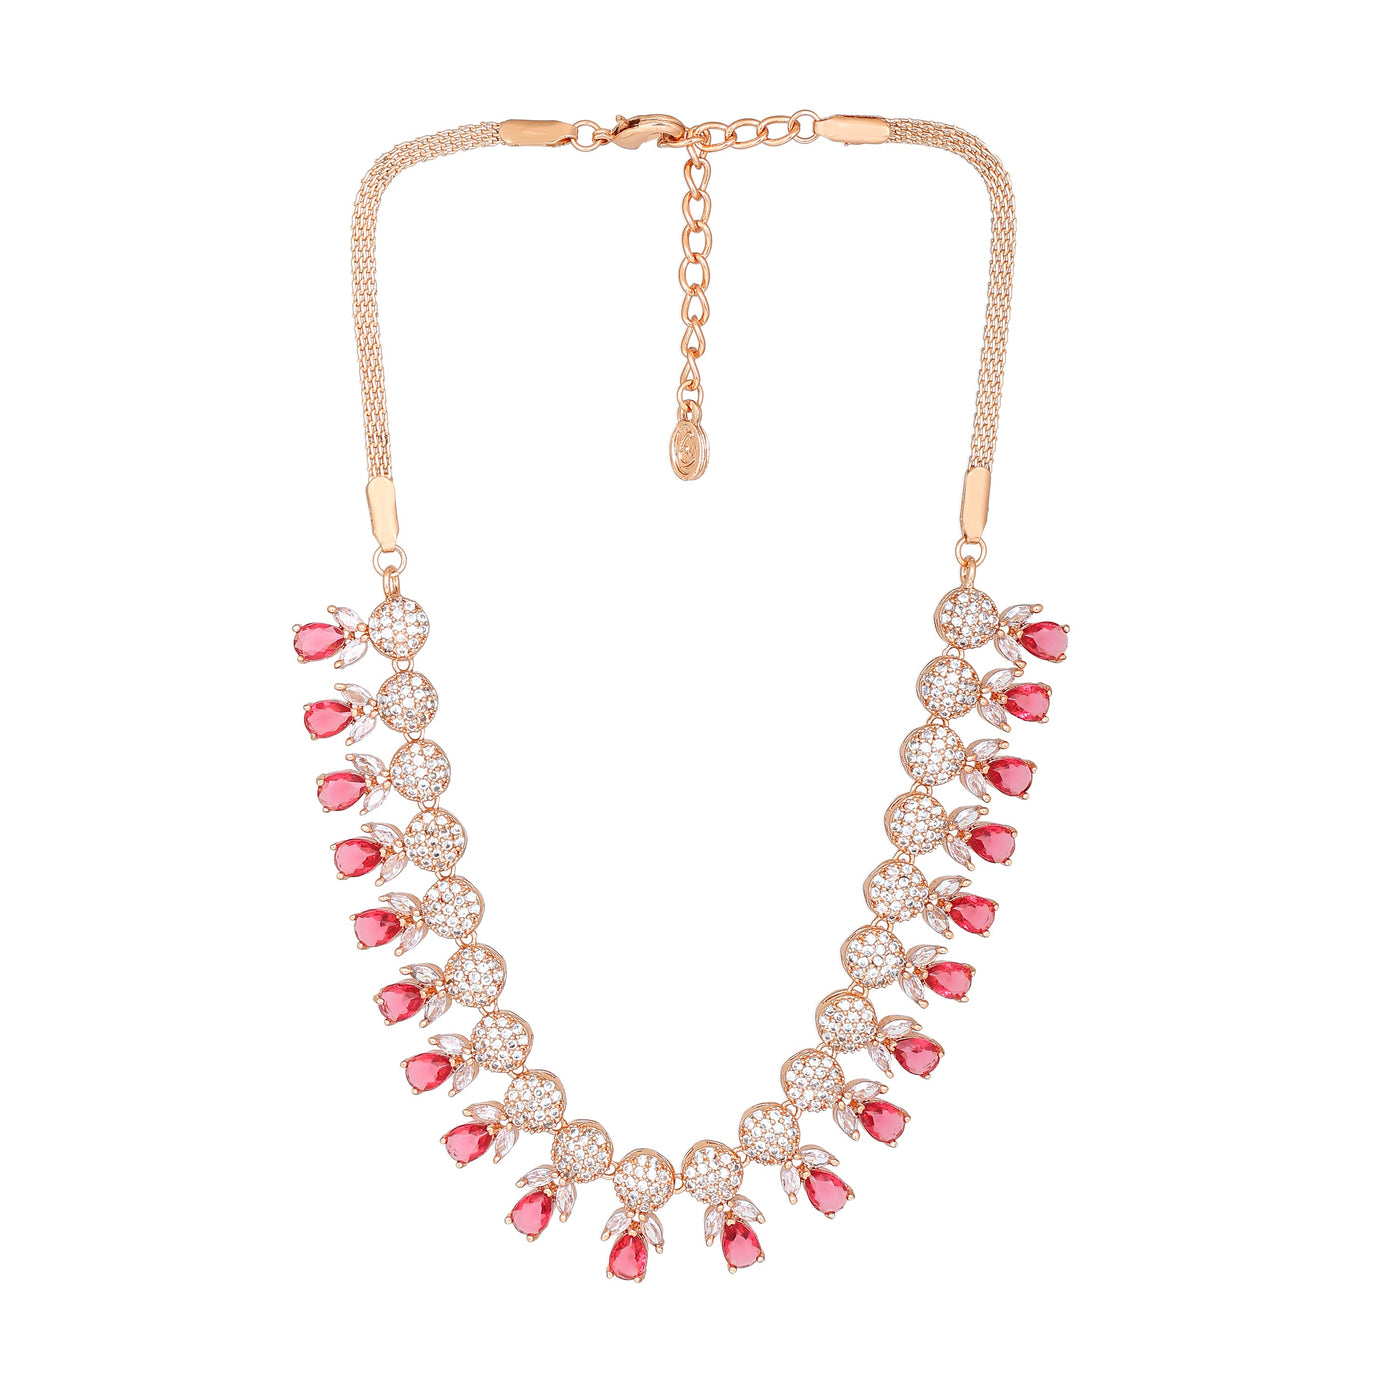 Estele Rose Gold Plated CZ Sparkling Necklace Set with Tourmaline Pink Crystals for Women